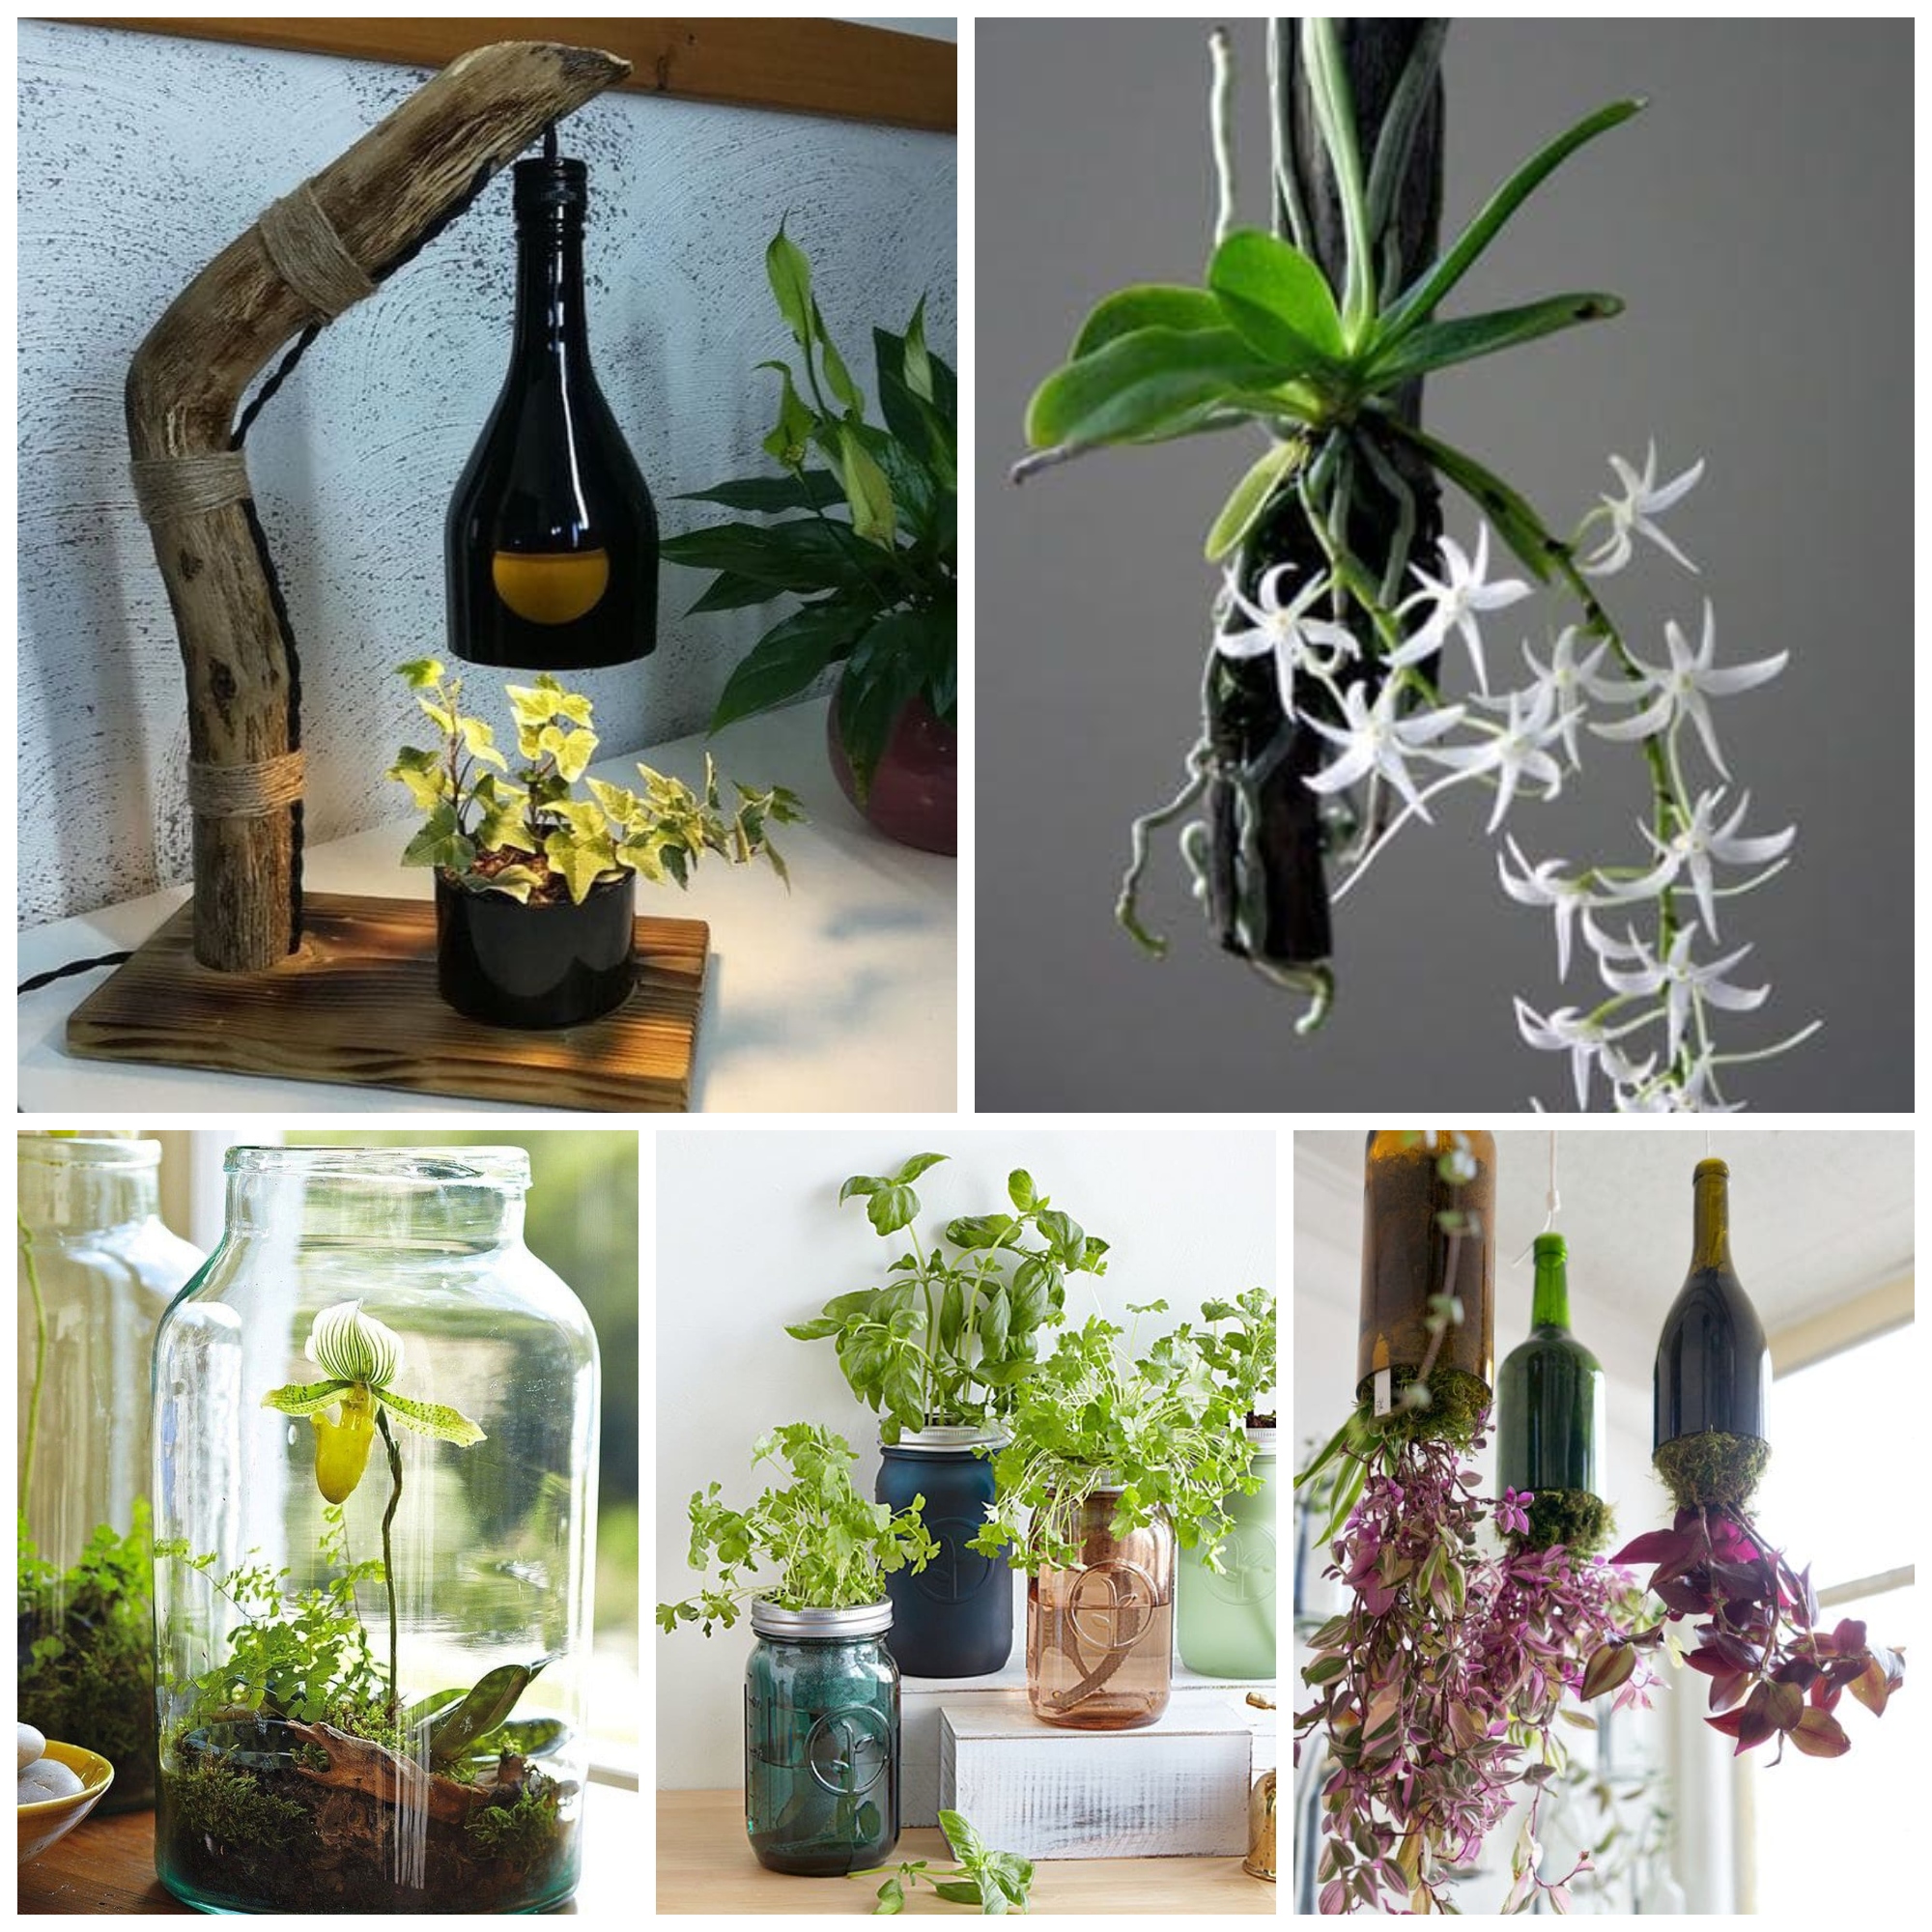 DIY Bottle Ideas To Decorate Your Home